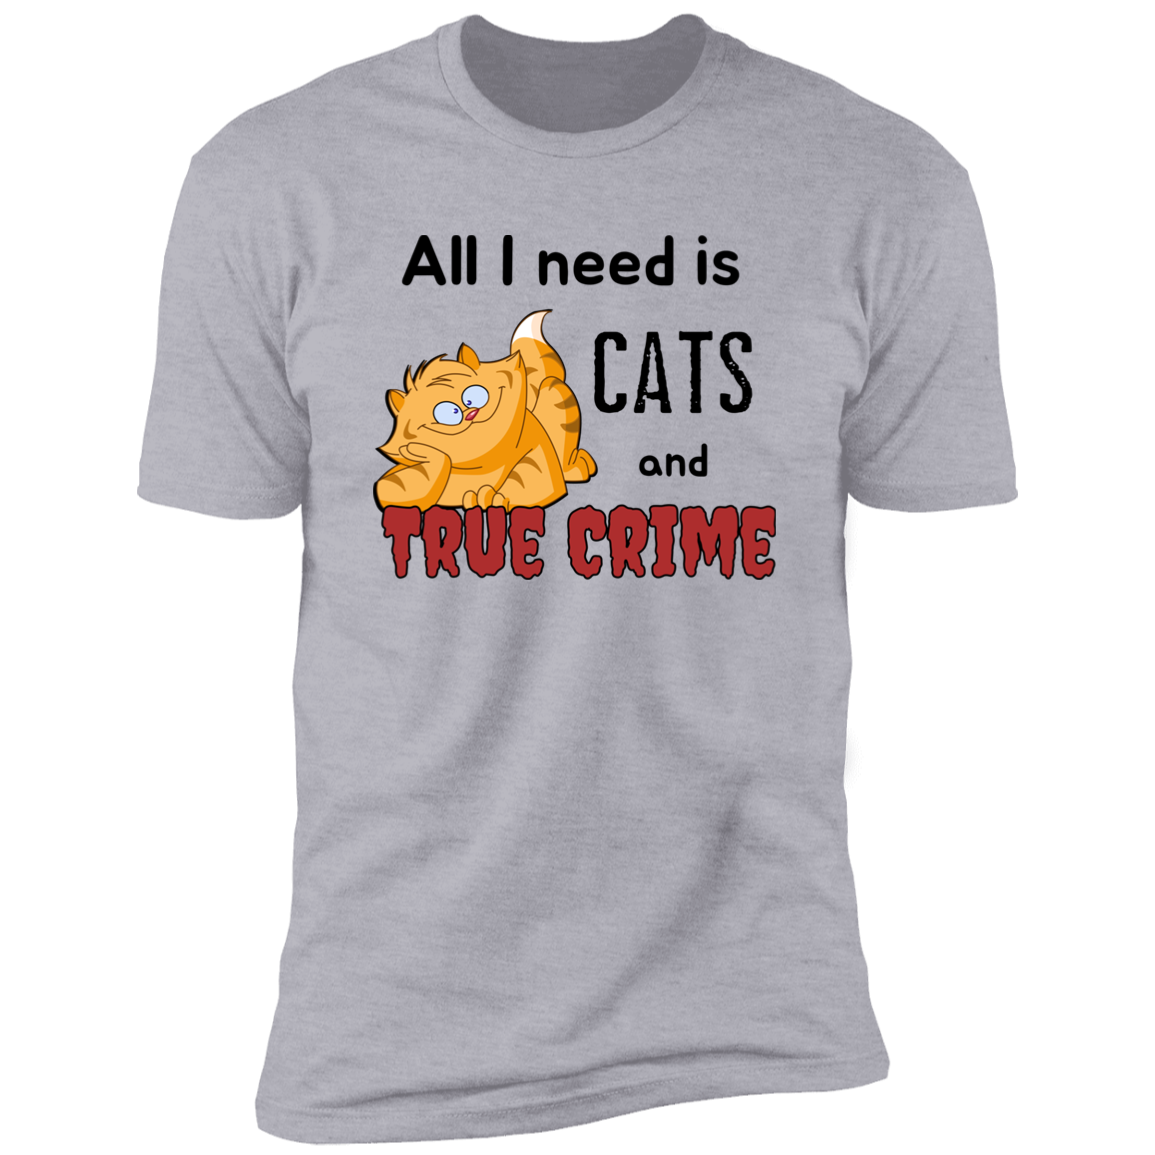 All I Need is Cats and True Crime, Cat shirt for humas, in light heather gray